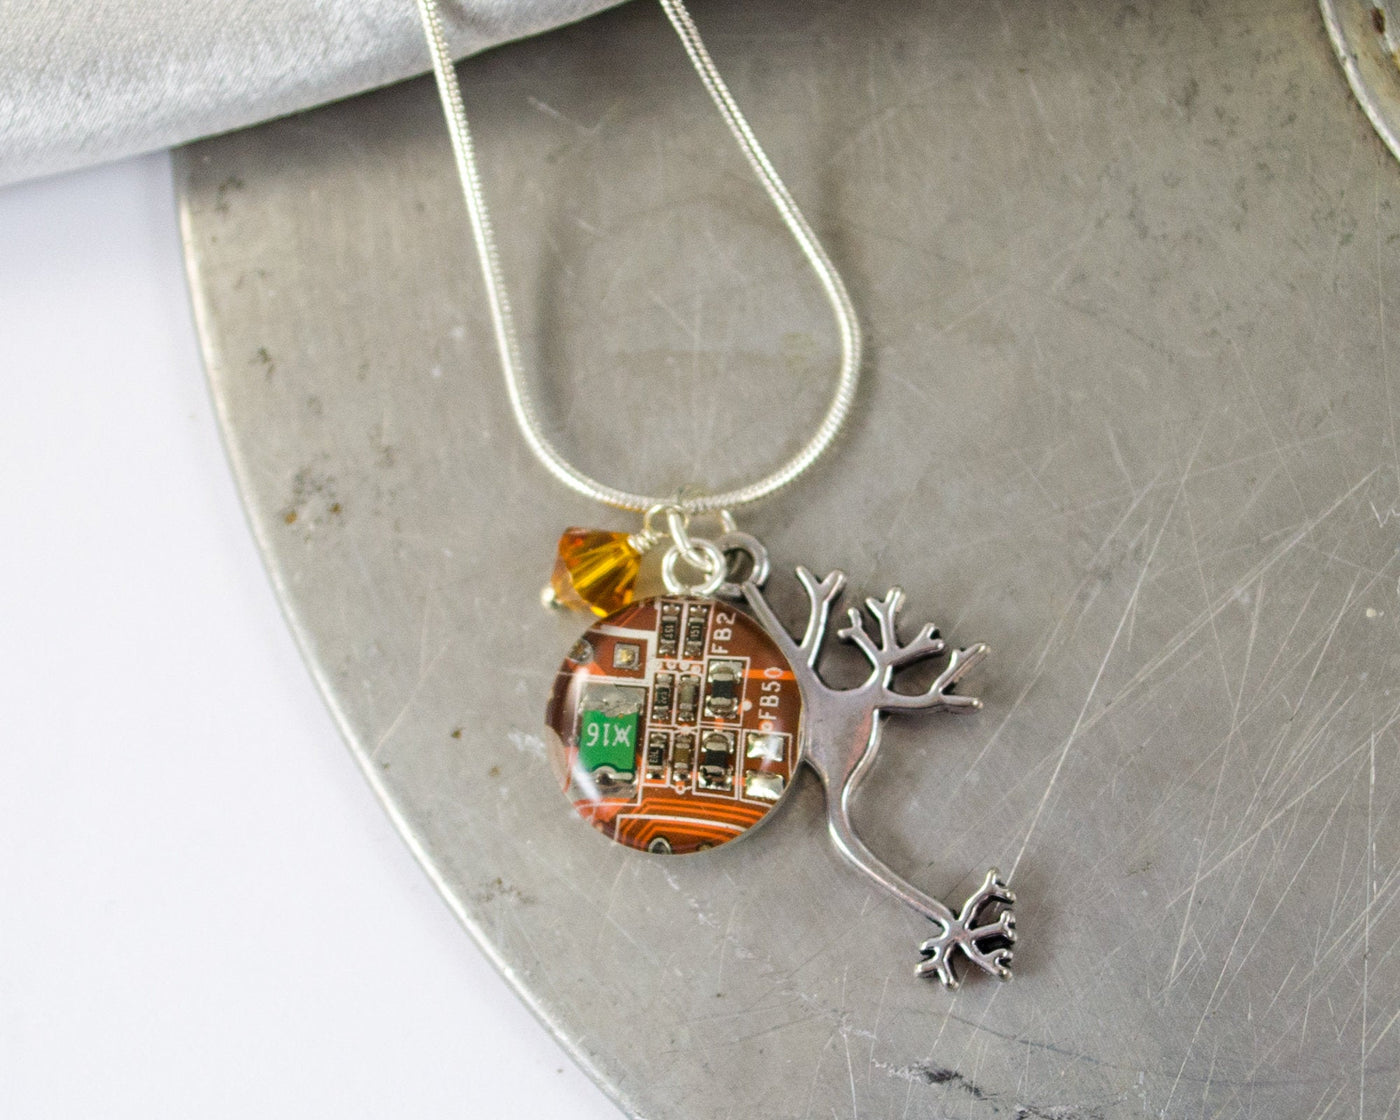 Neuron and Circuit Board Charm Necklace